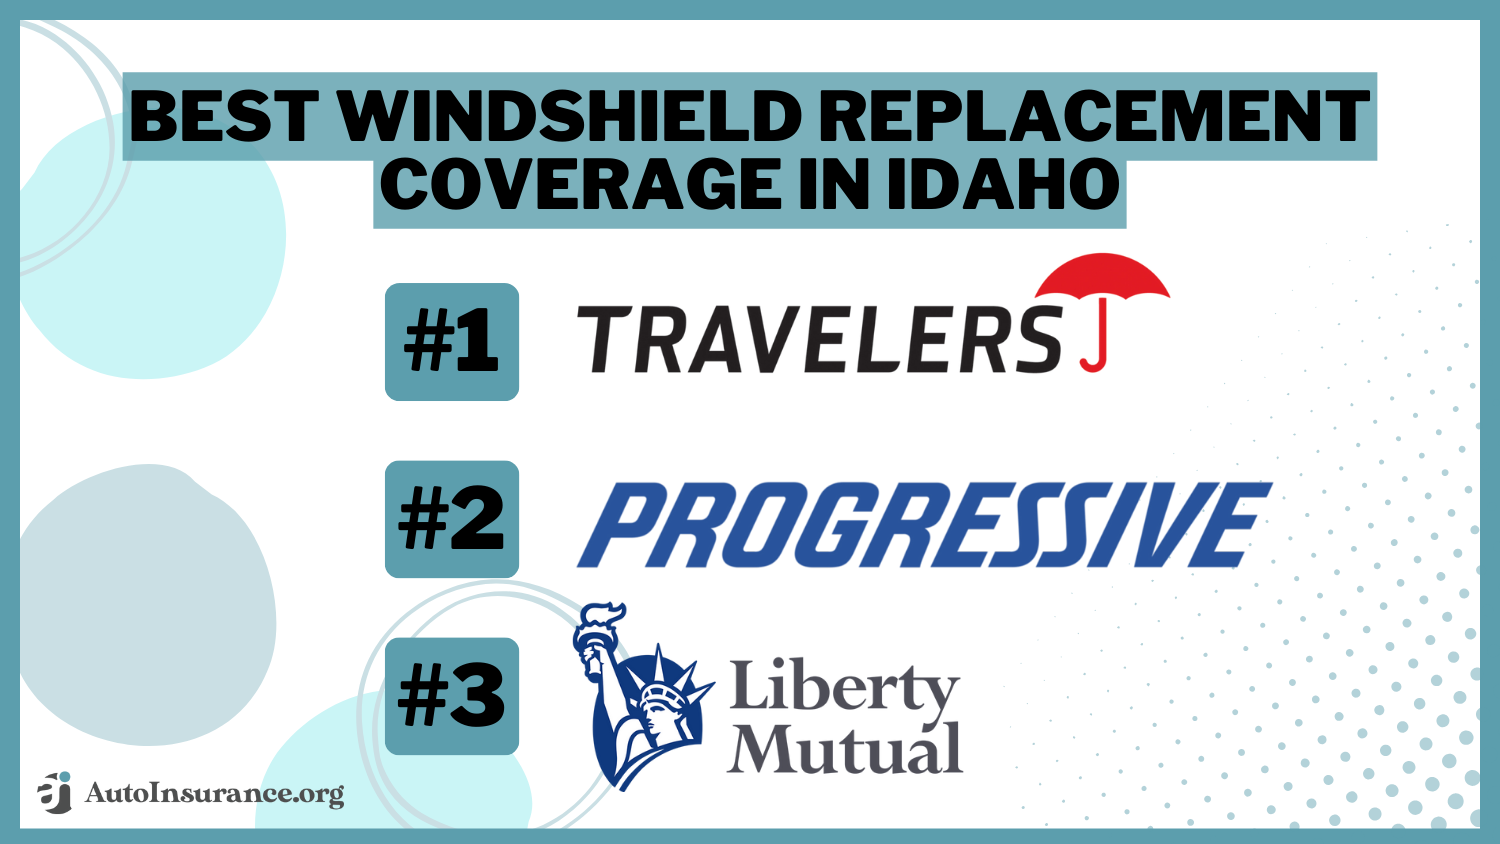 Best Windshield Replacement Coverage in Idaho